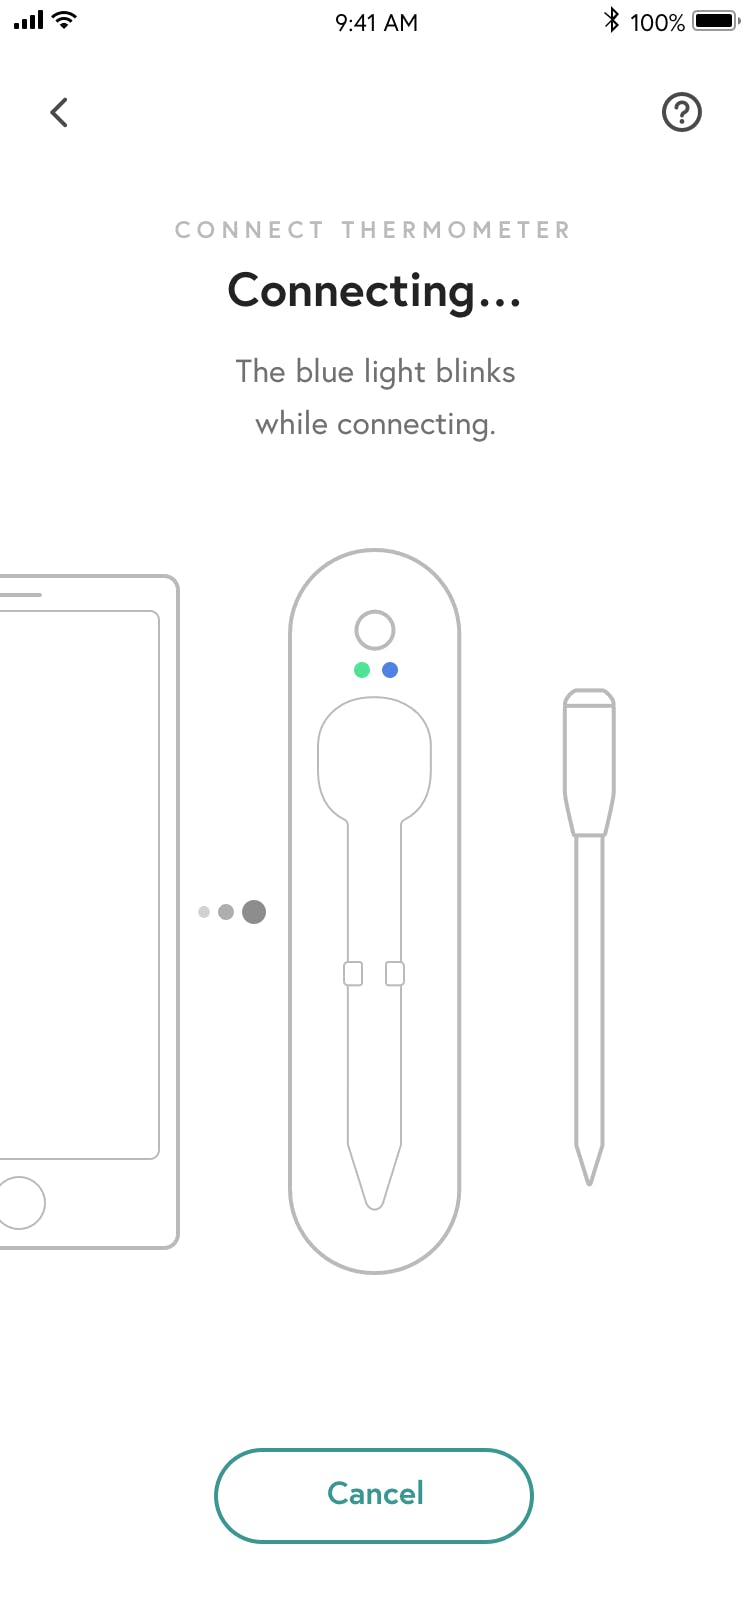 How do I connect/pair the Smart Thermometer to my phone? – Yummly Help  Center